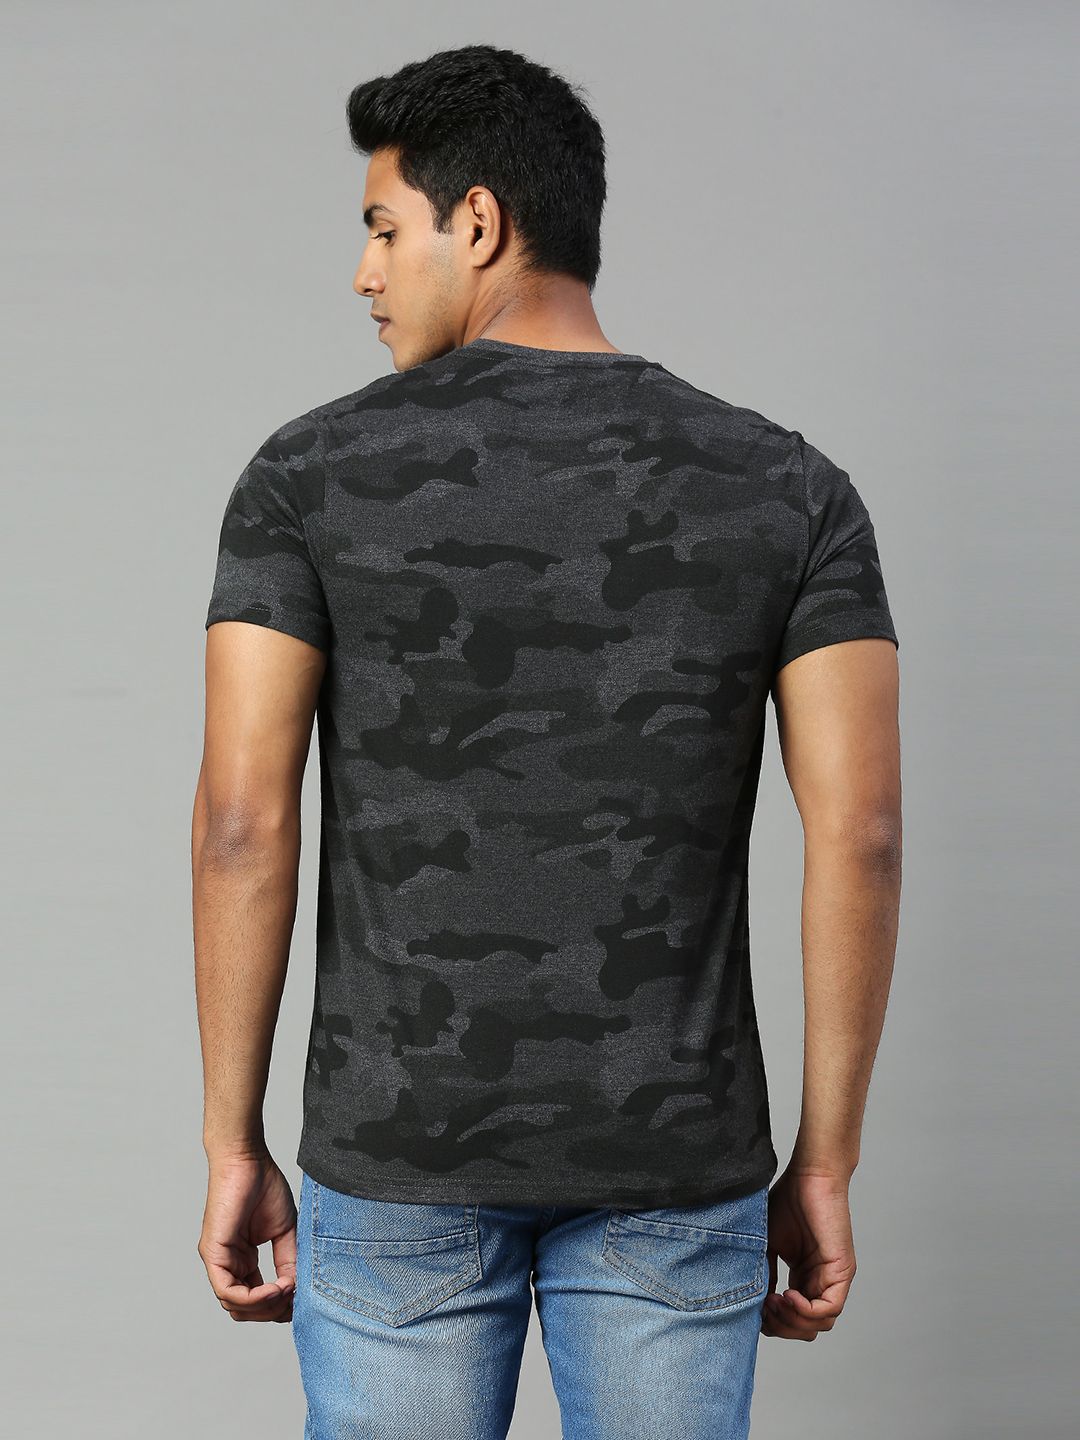 Buy Official ICC CWC-23 Men Camo Black Printed Round Neck T-Shirts from ...